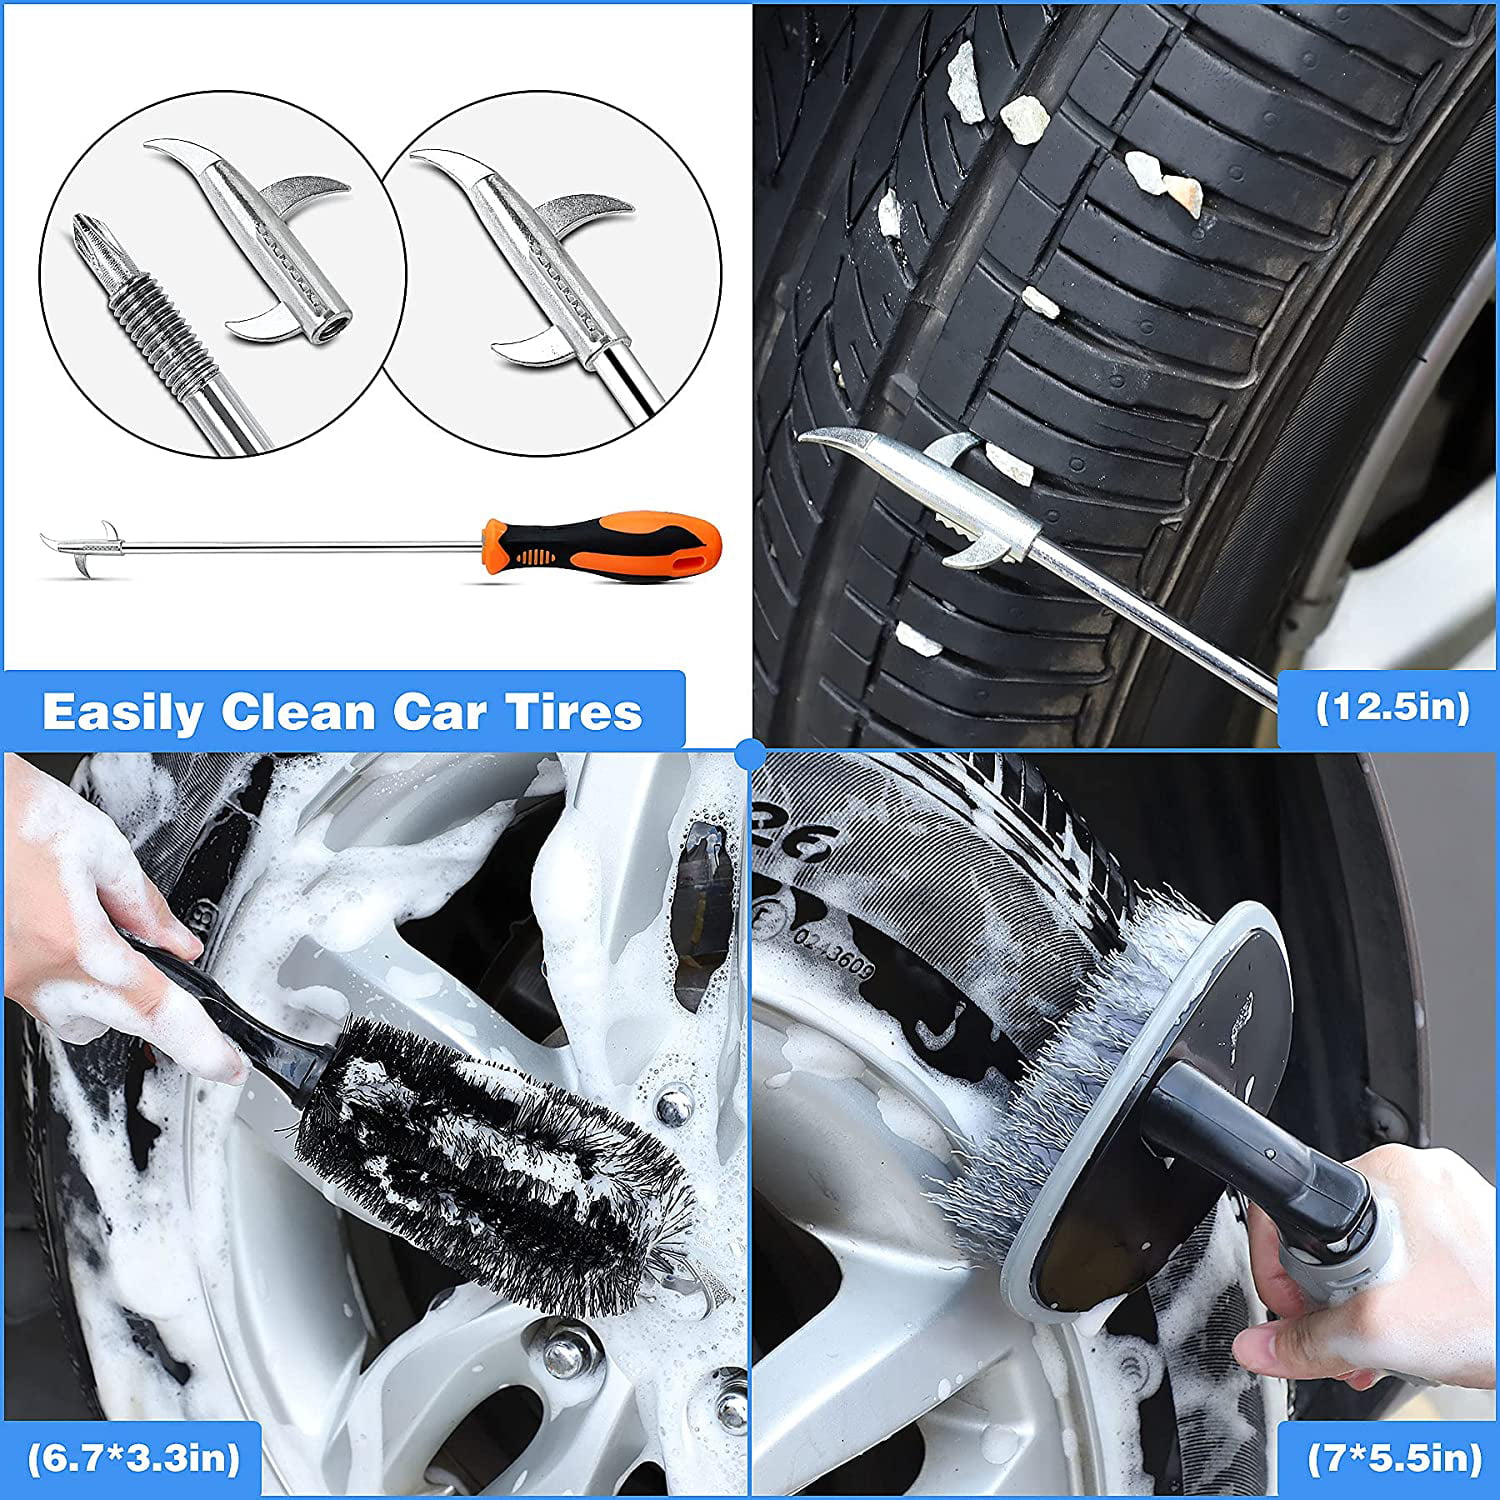 Car Washing Cleaning Kit Tools Car Wash Equipment Seven in One Car Wash  Mitt Auto Cleaner Duster Vehicle Squeegee Microfiber Rag Cleaning  Accessories Esg13053 - China Car Wash Kit, Car Washing Kit